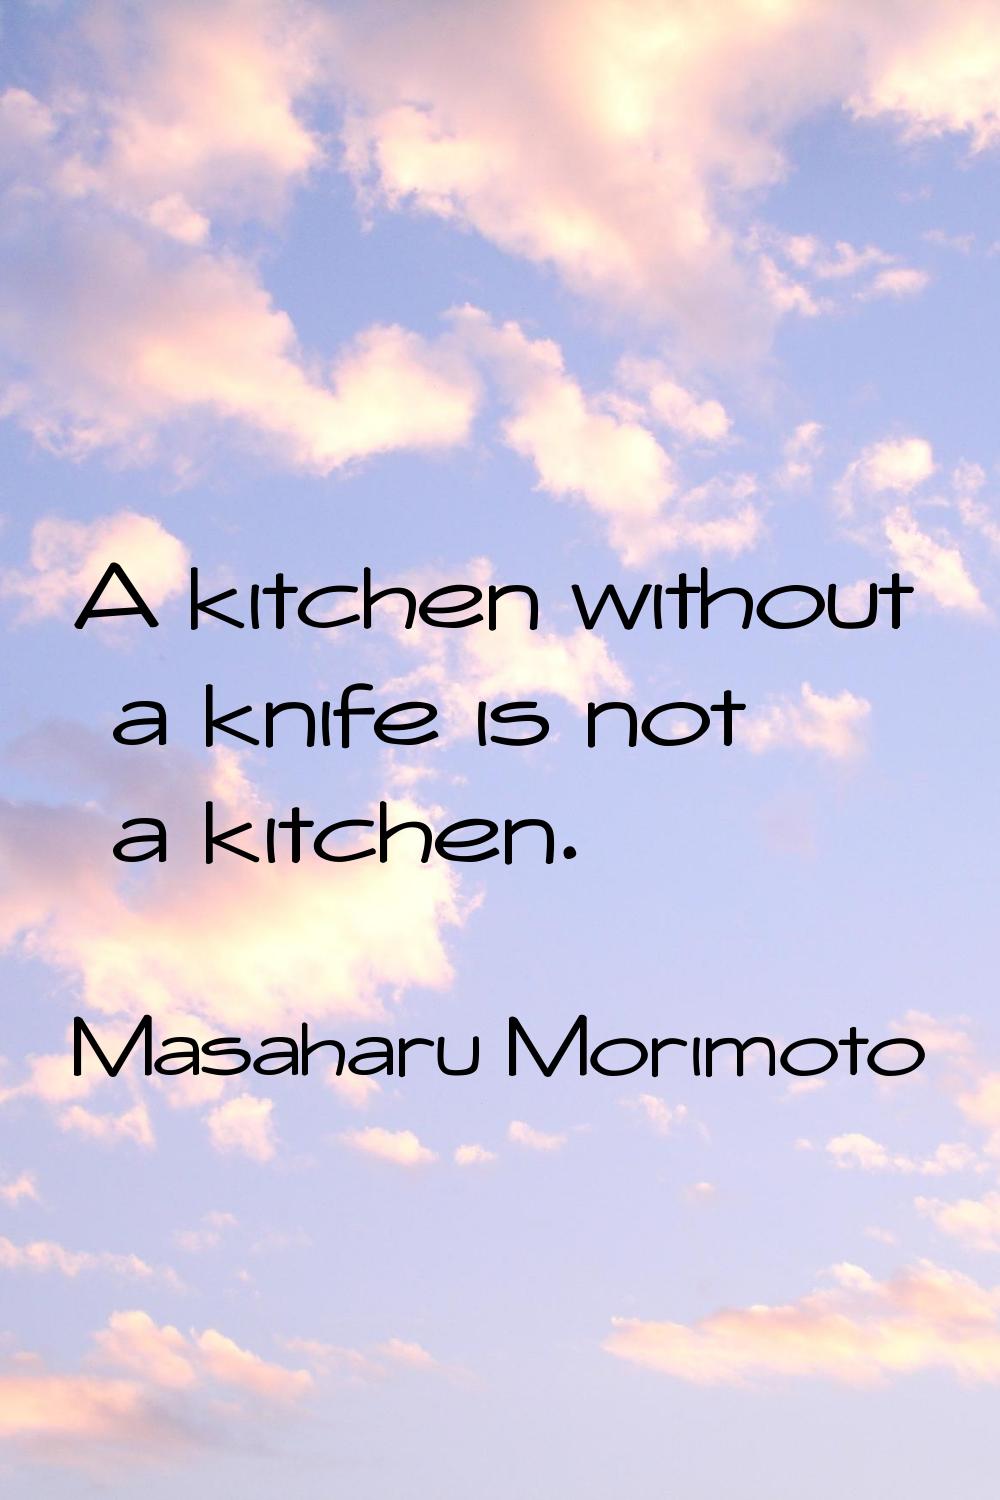 A kitchen without a knife is not a kitchen.